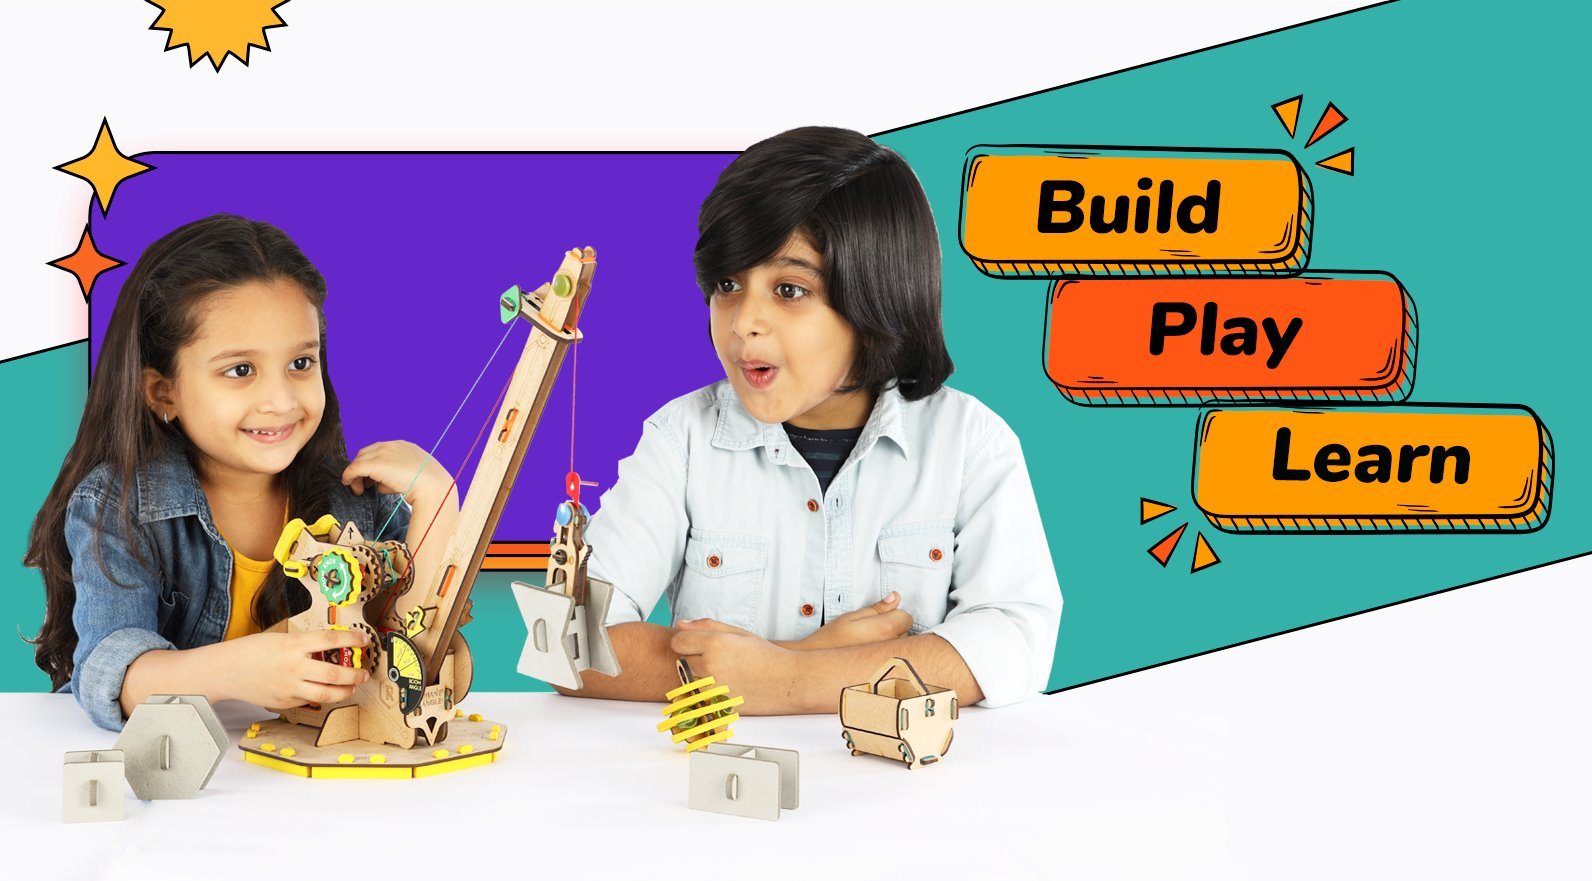 Smartivity Construction Crane: Let Young Ones Make AND Break